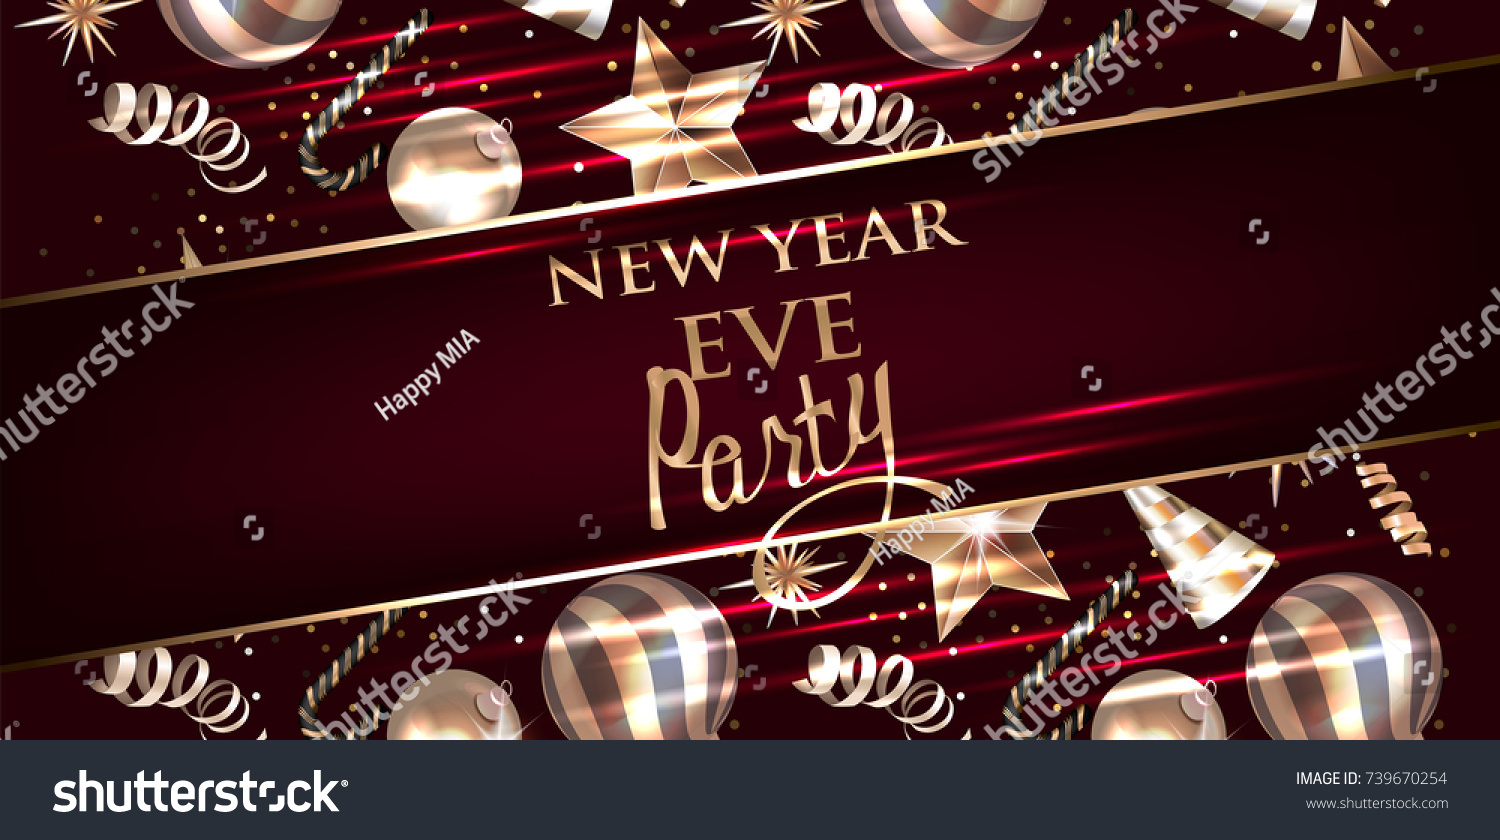 New year eve invitation card with christmas decorations Vector illustration